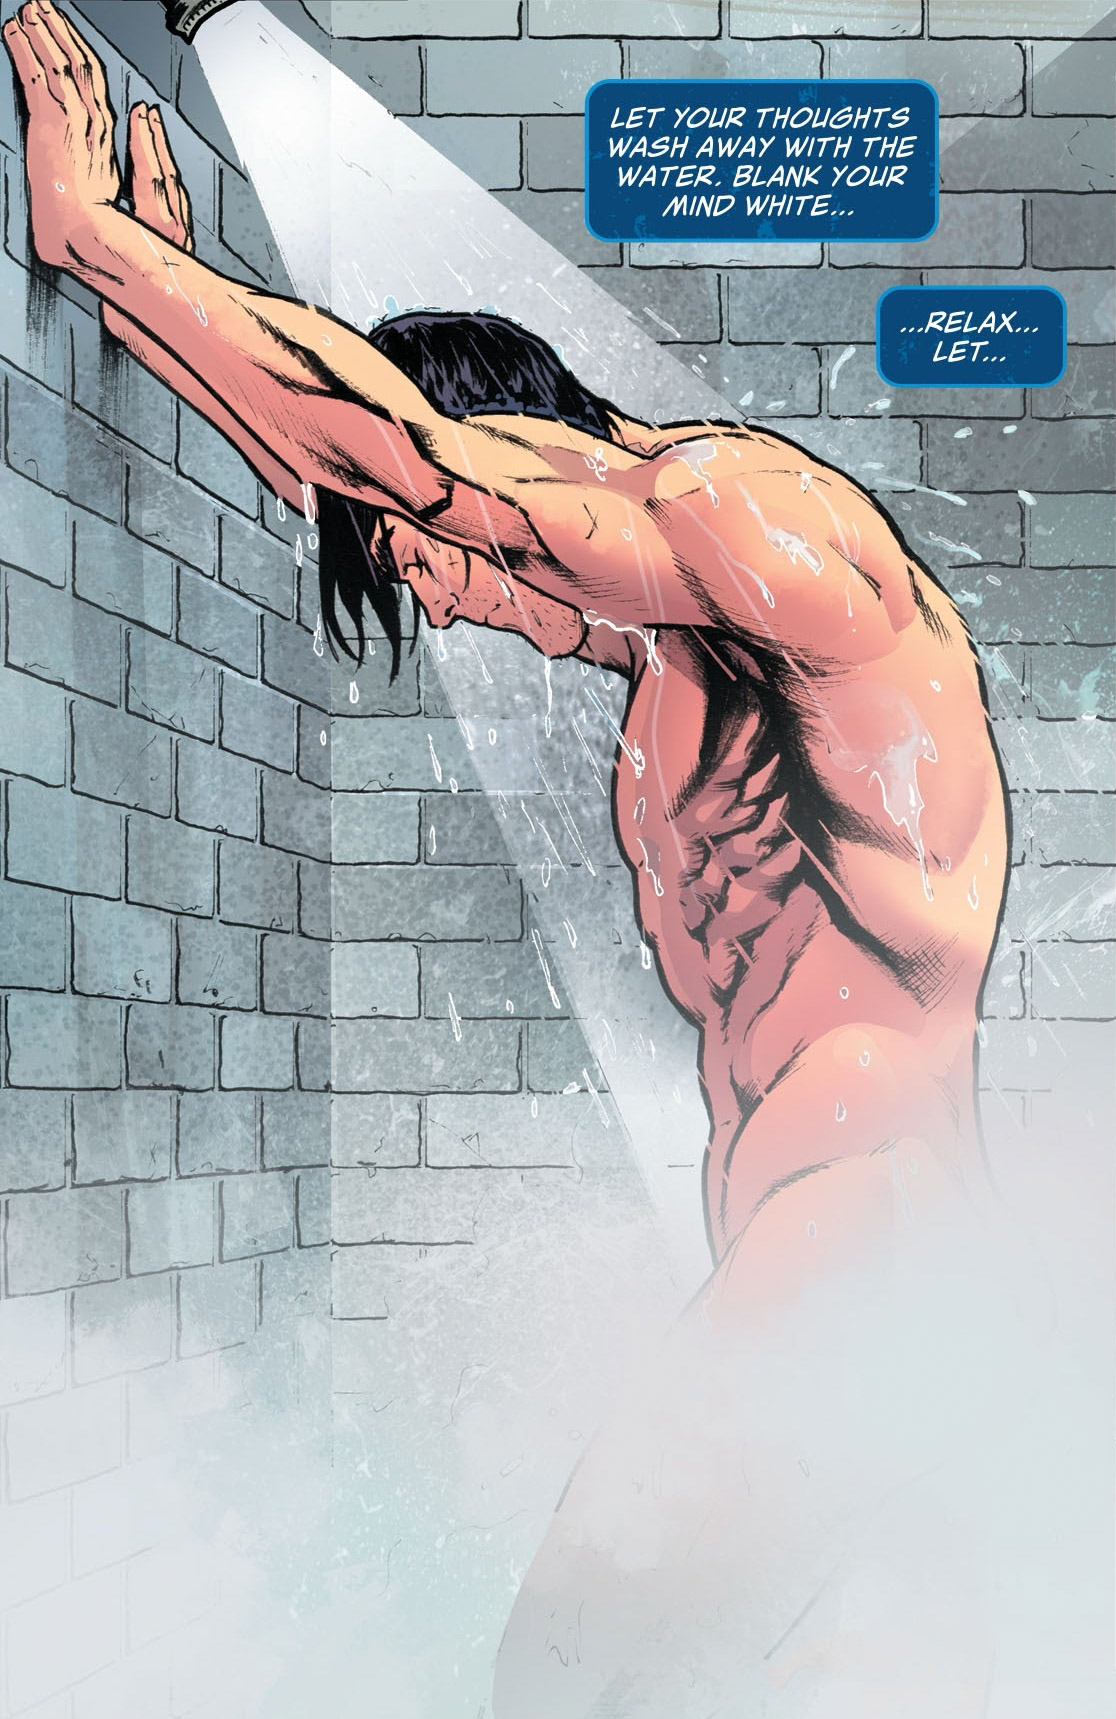 Nightwing Attacked in the Shower 